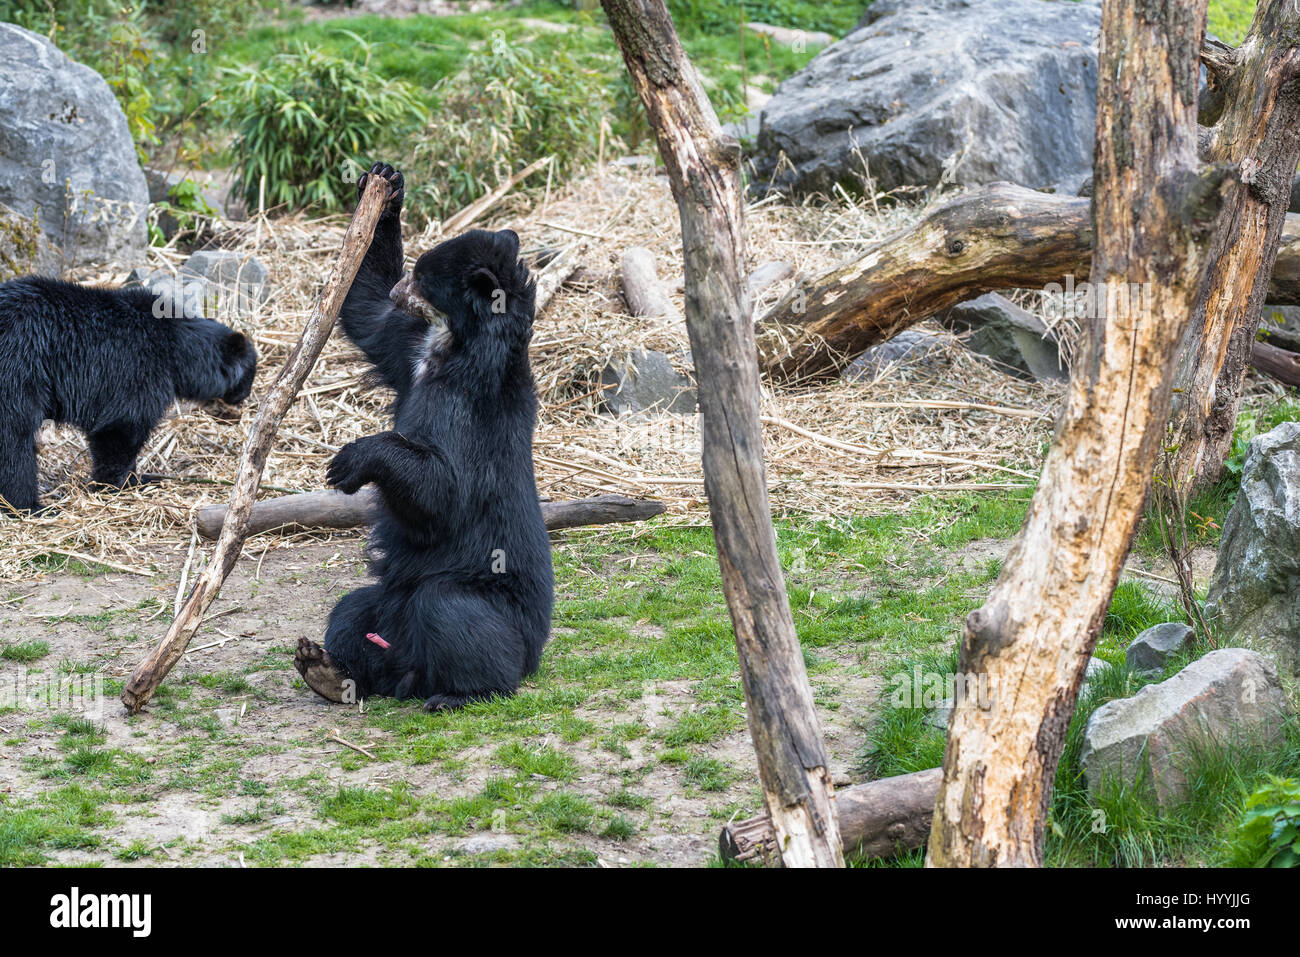 Black bear cubs fighting and playing with each other Stock Photo